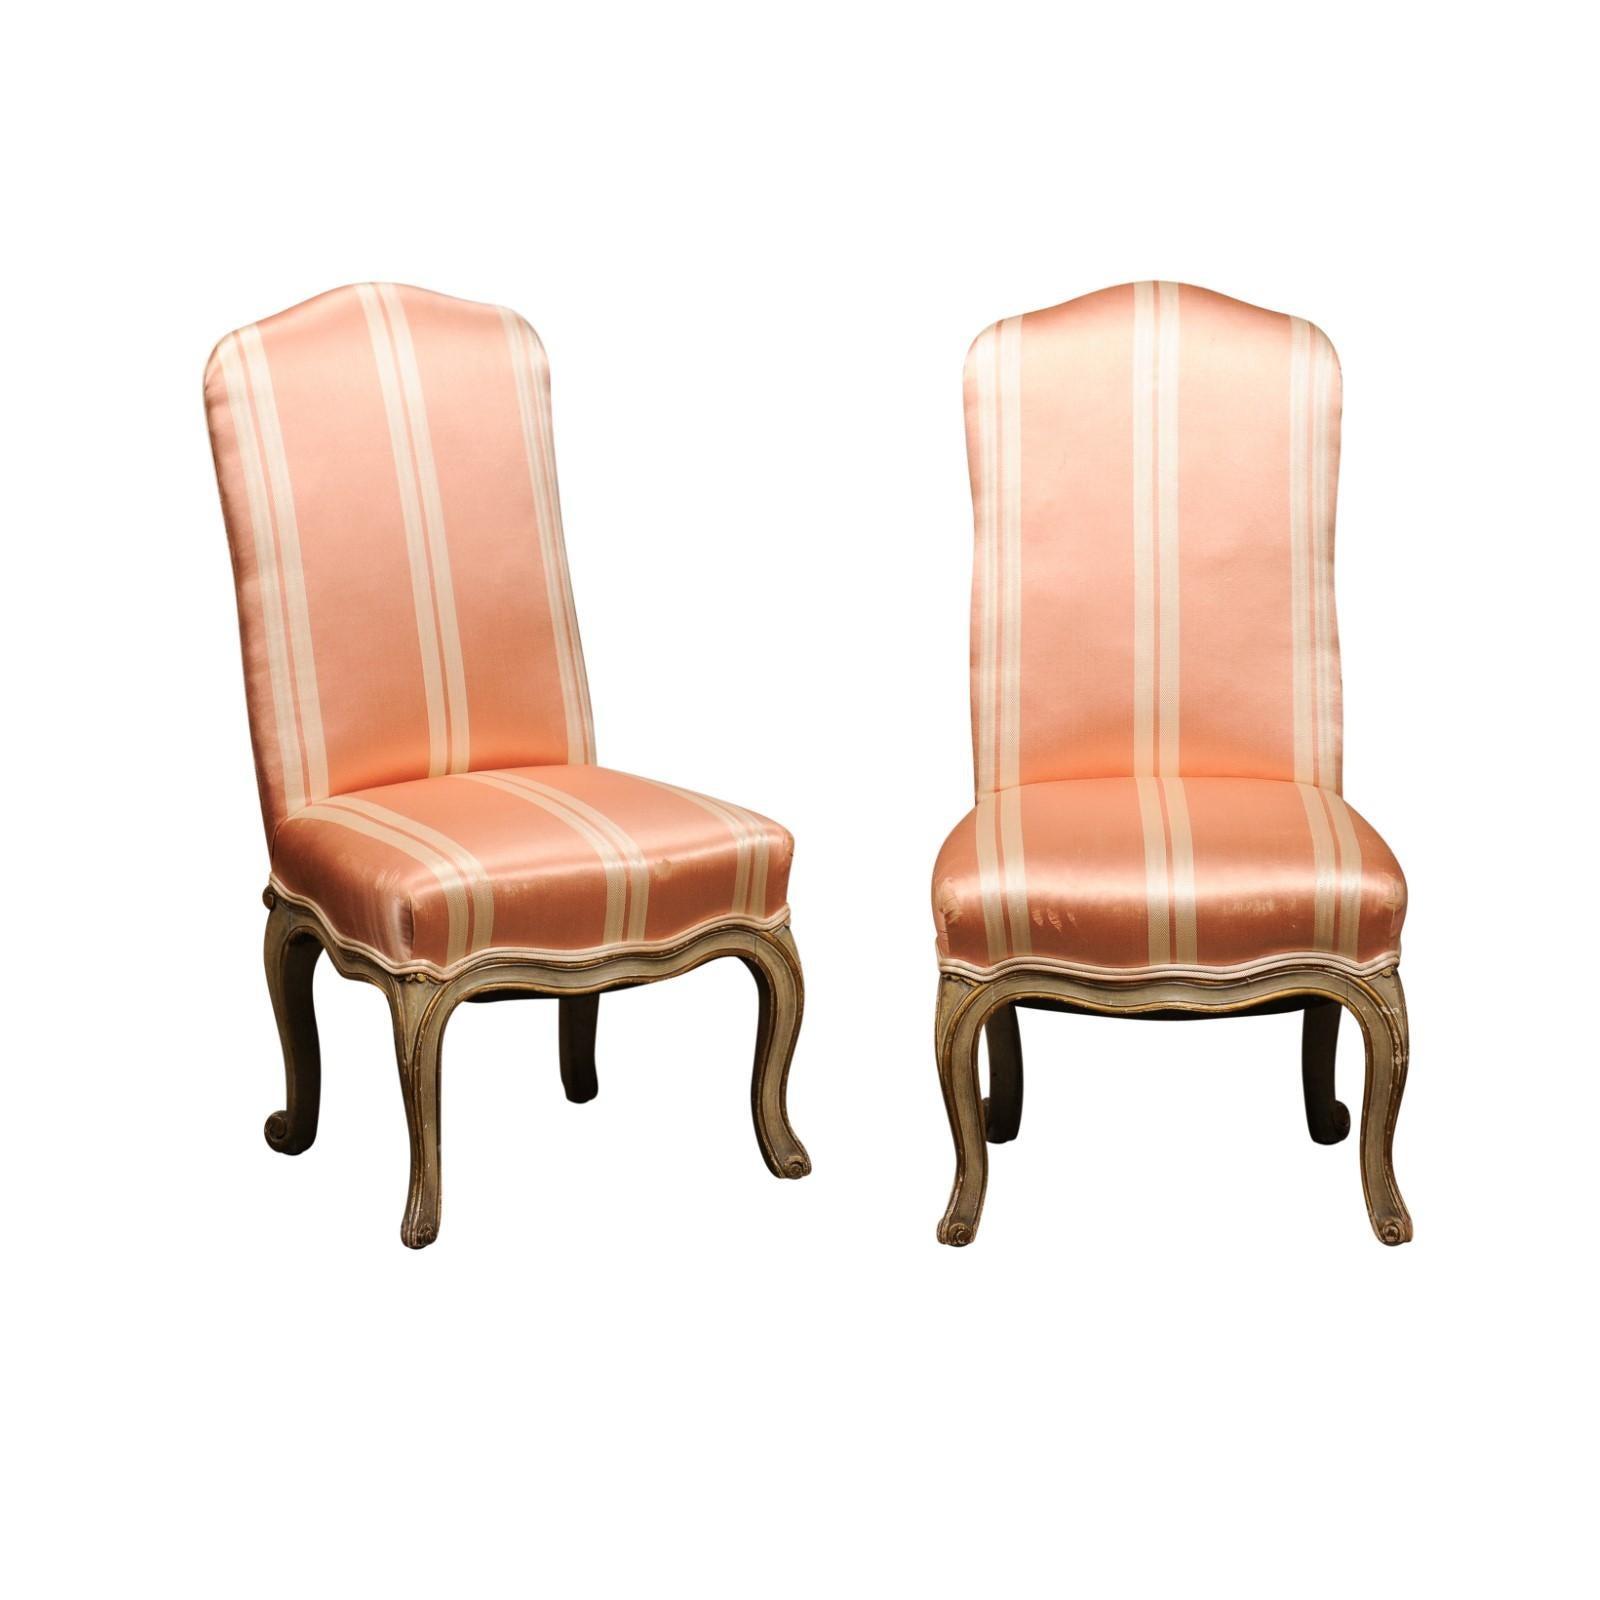 A pair of Elsie De Wolfe Louis XV style slipper chairs from the early 20th century, with cabriole legs and striped salmon upholstery. Made in the USA during the early years of the 20th century, each of this pair of slipper chairs, created by actress